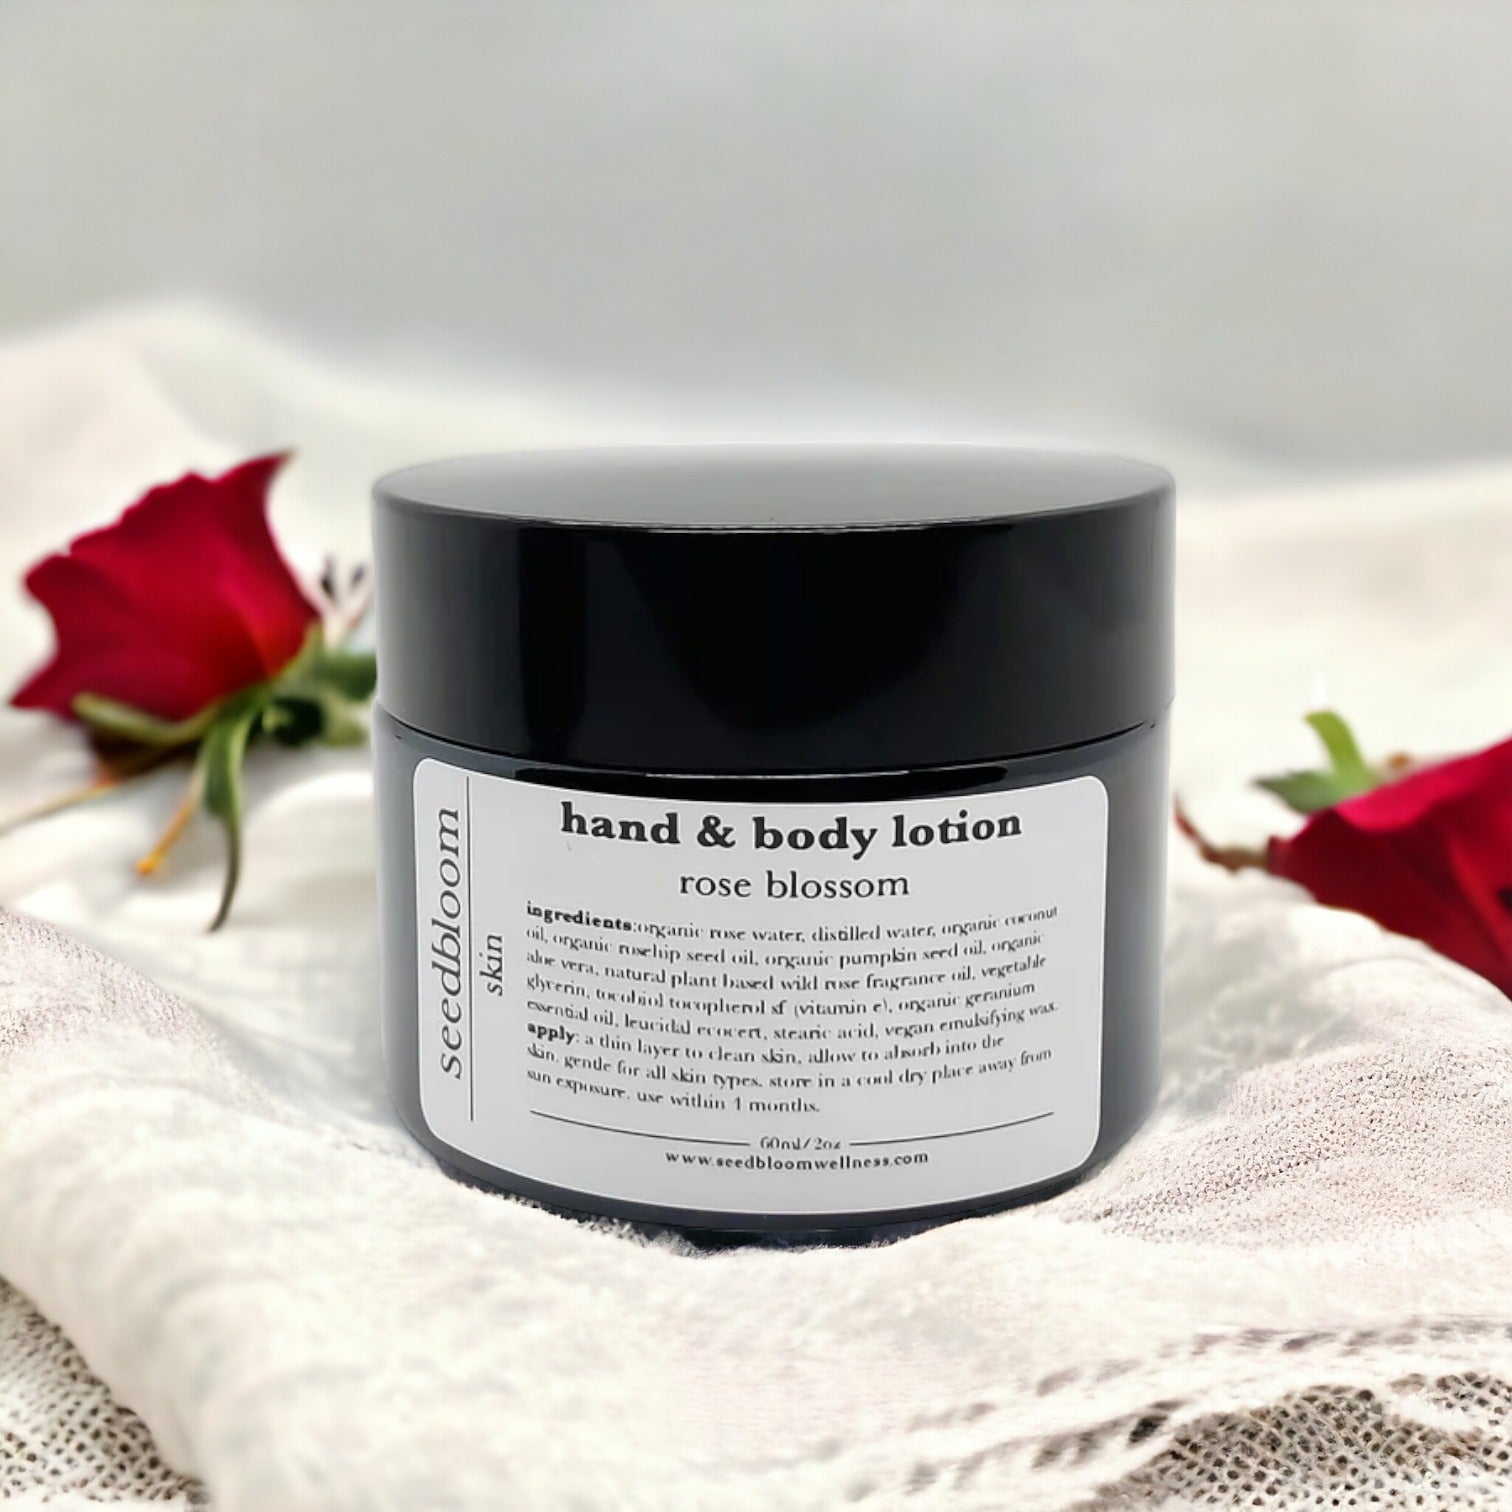 Jar of the Rose Blossom hand and body lotion from seedbloom on a linen cloth with red roses